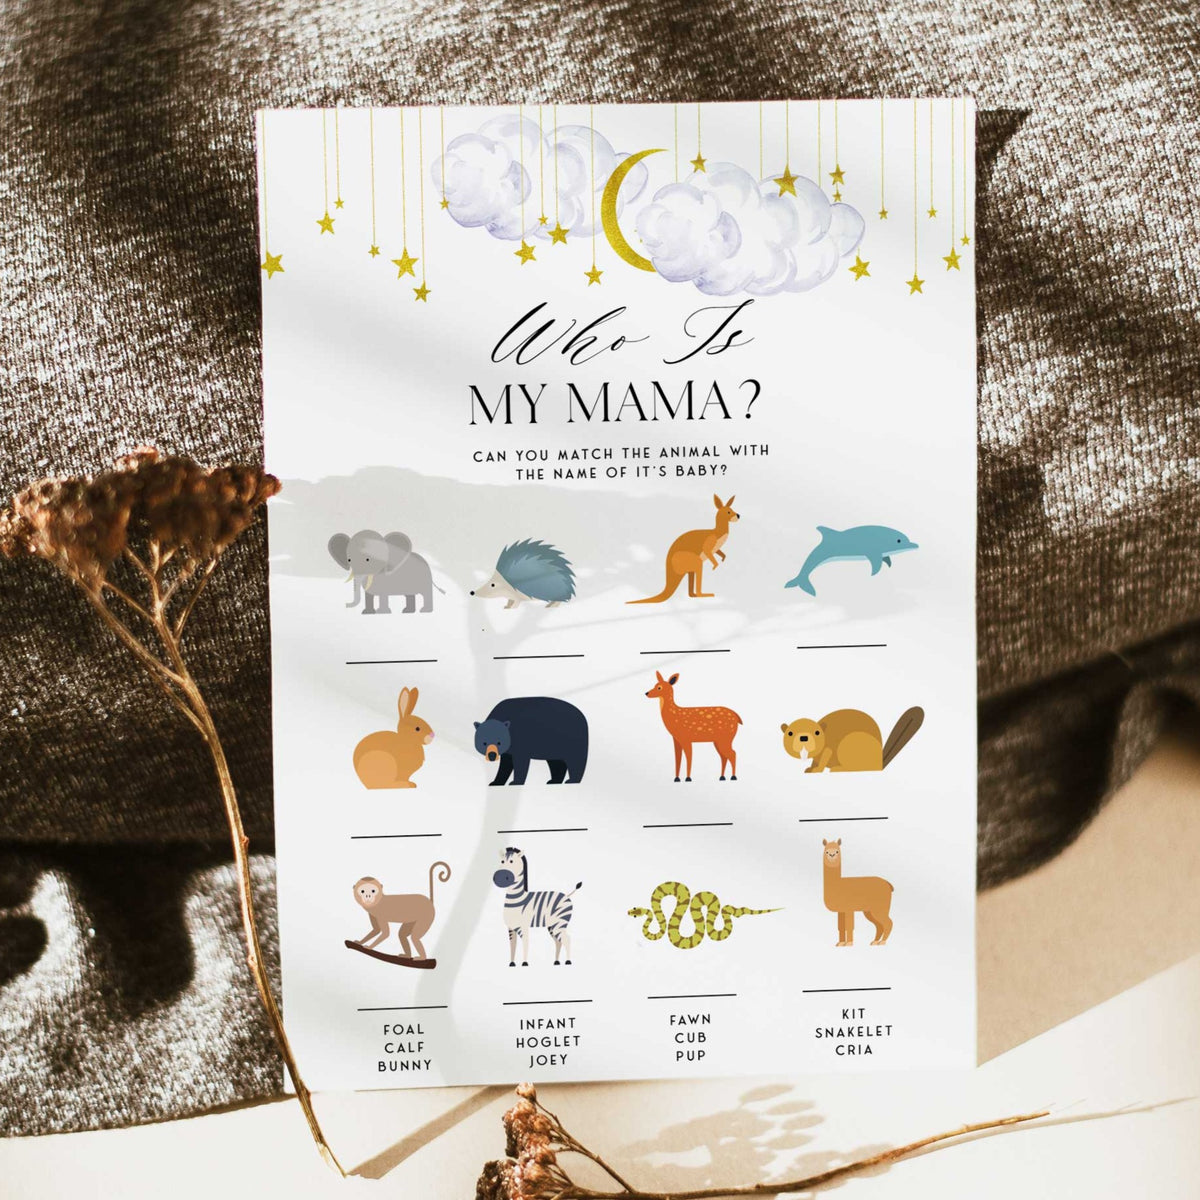 Fully editable and printable baby shower who is my mama game with a little star design. Perfect for a Twinkle Little Star baby shower themed party